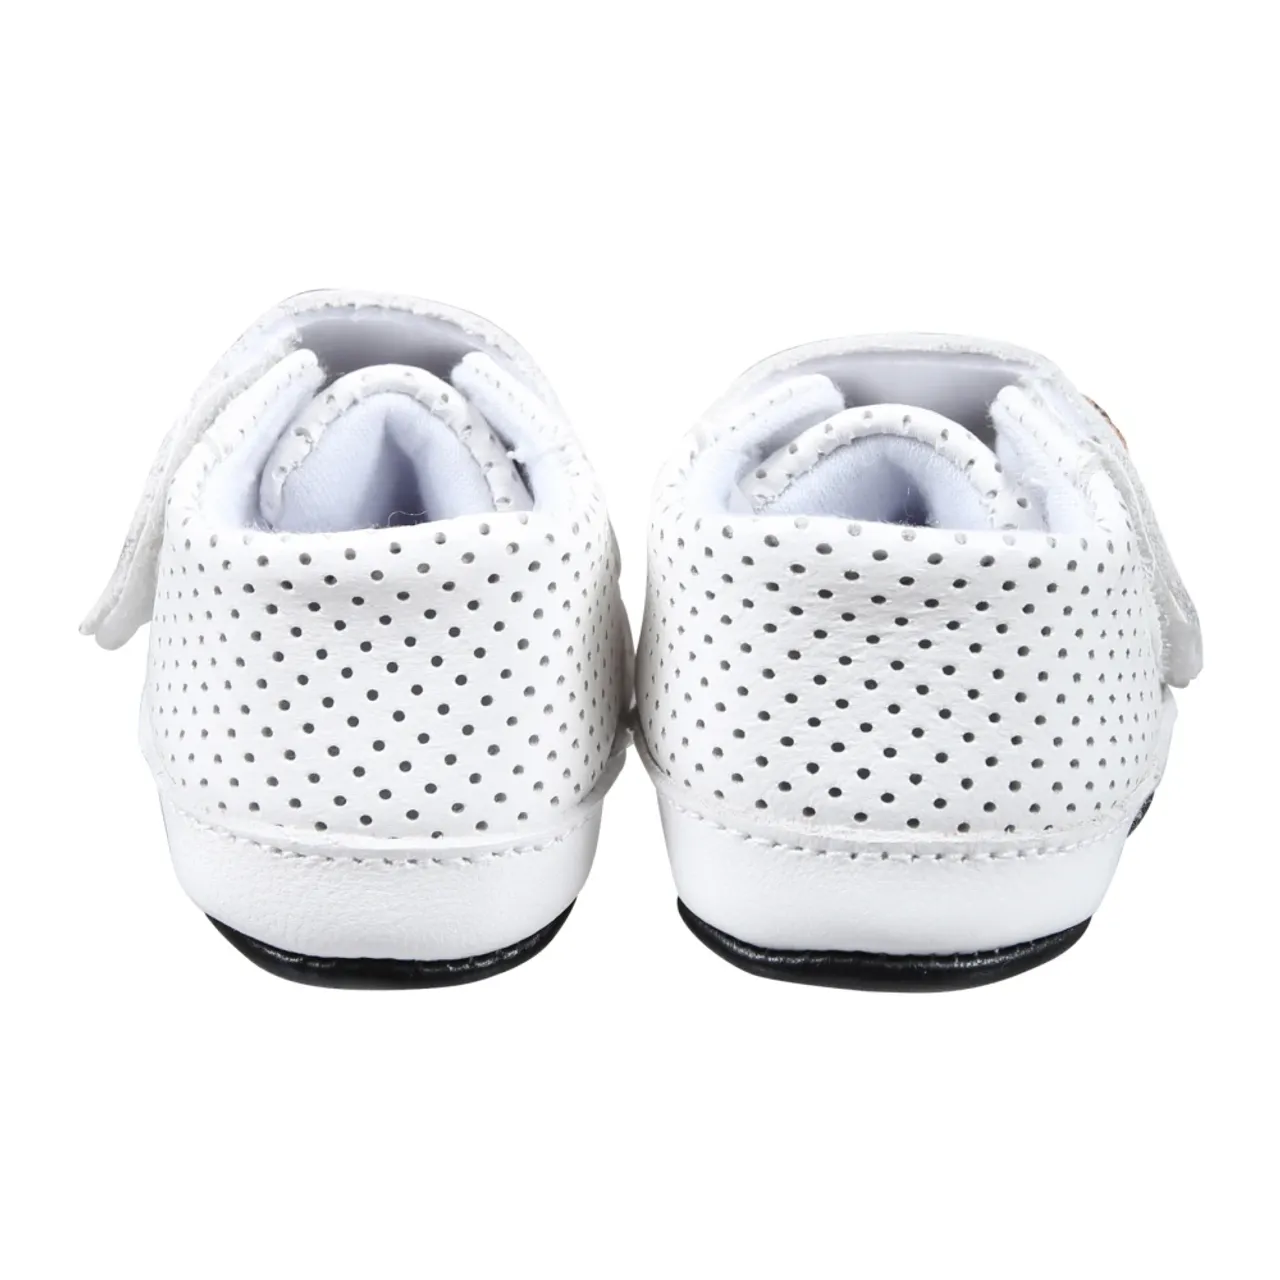 Hugo Boss , White Leather Sneakers with Velcro Closure ,White unisex, Sizes: